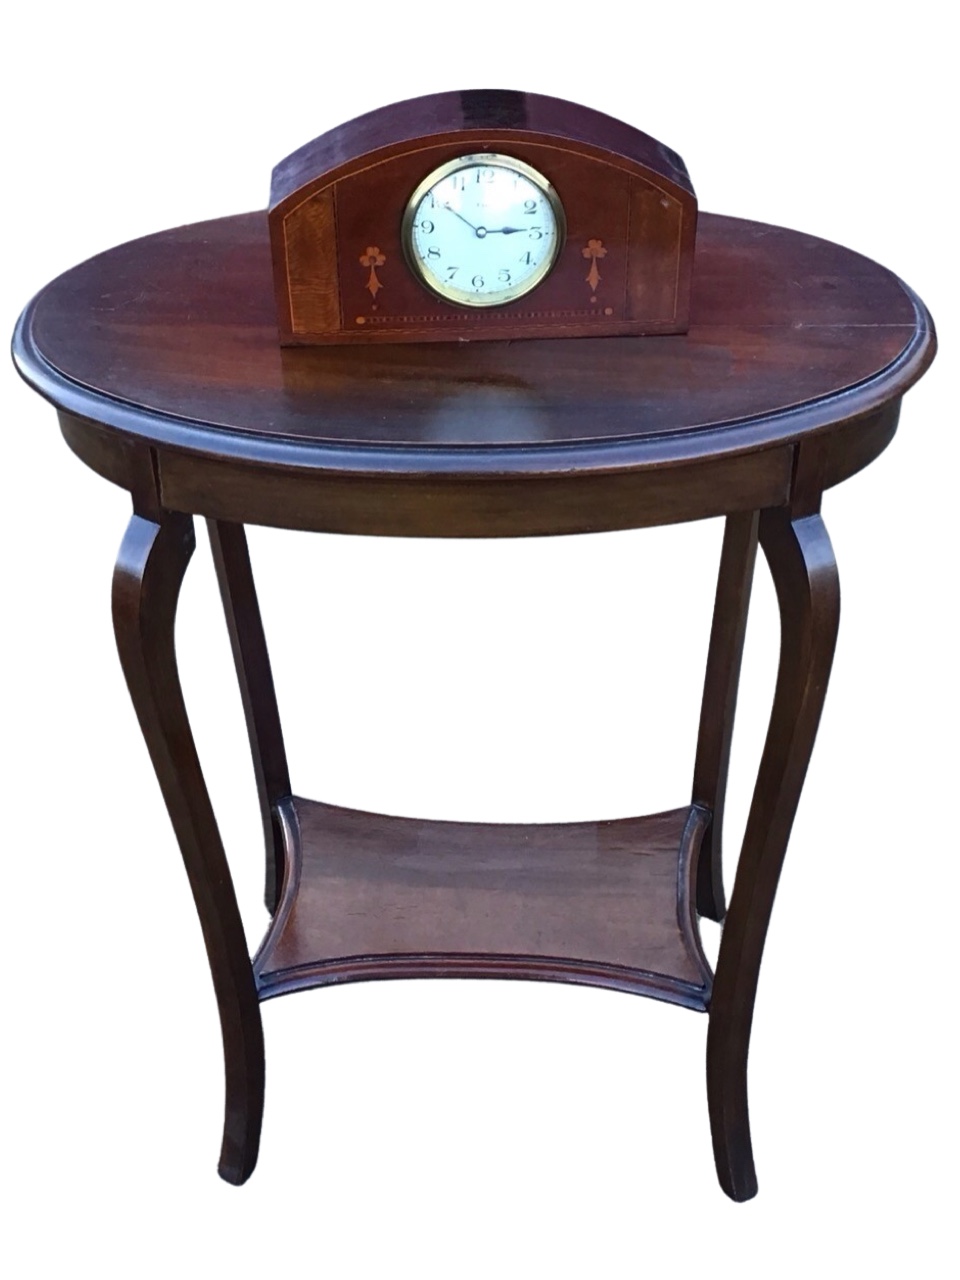 An Edwardian mahogany occasional table with oval moulded top above a plain apron, raised on square